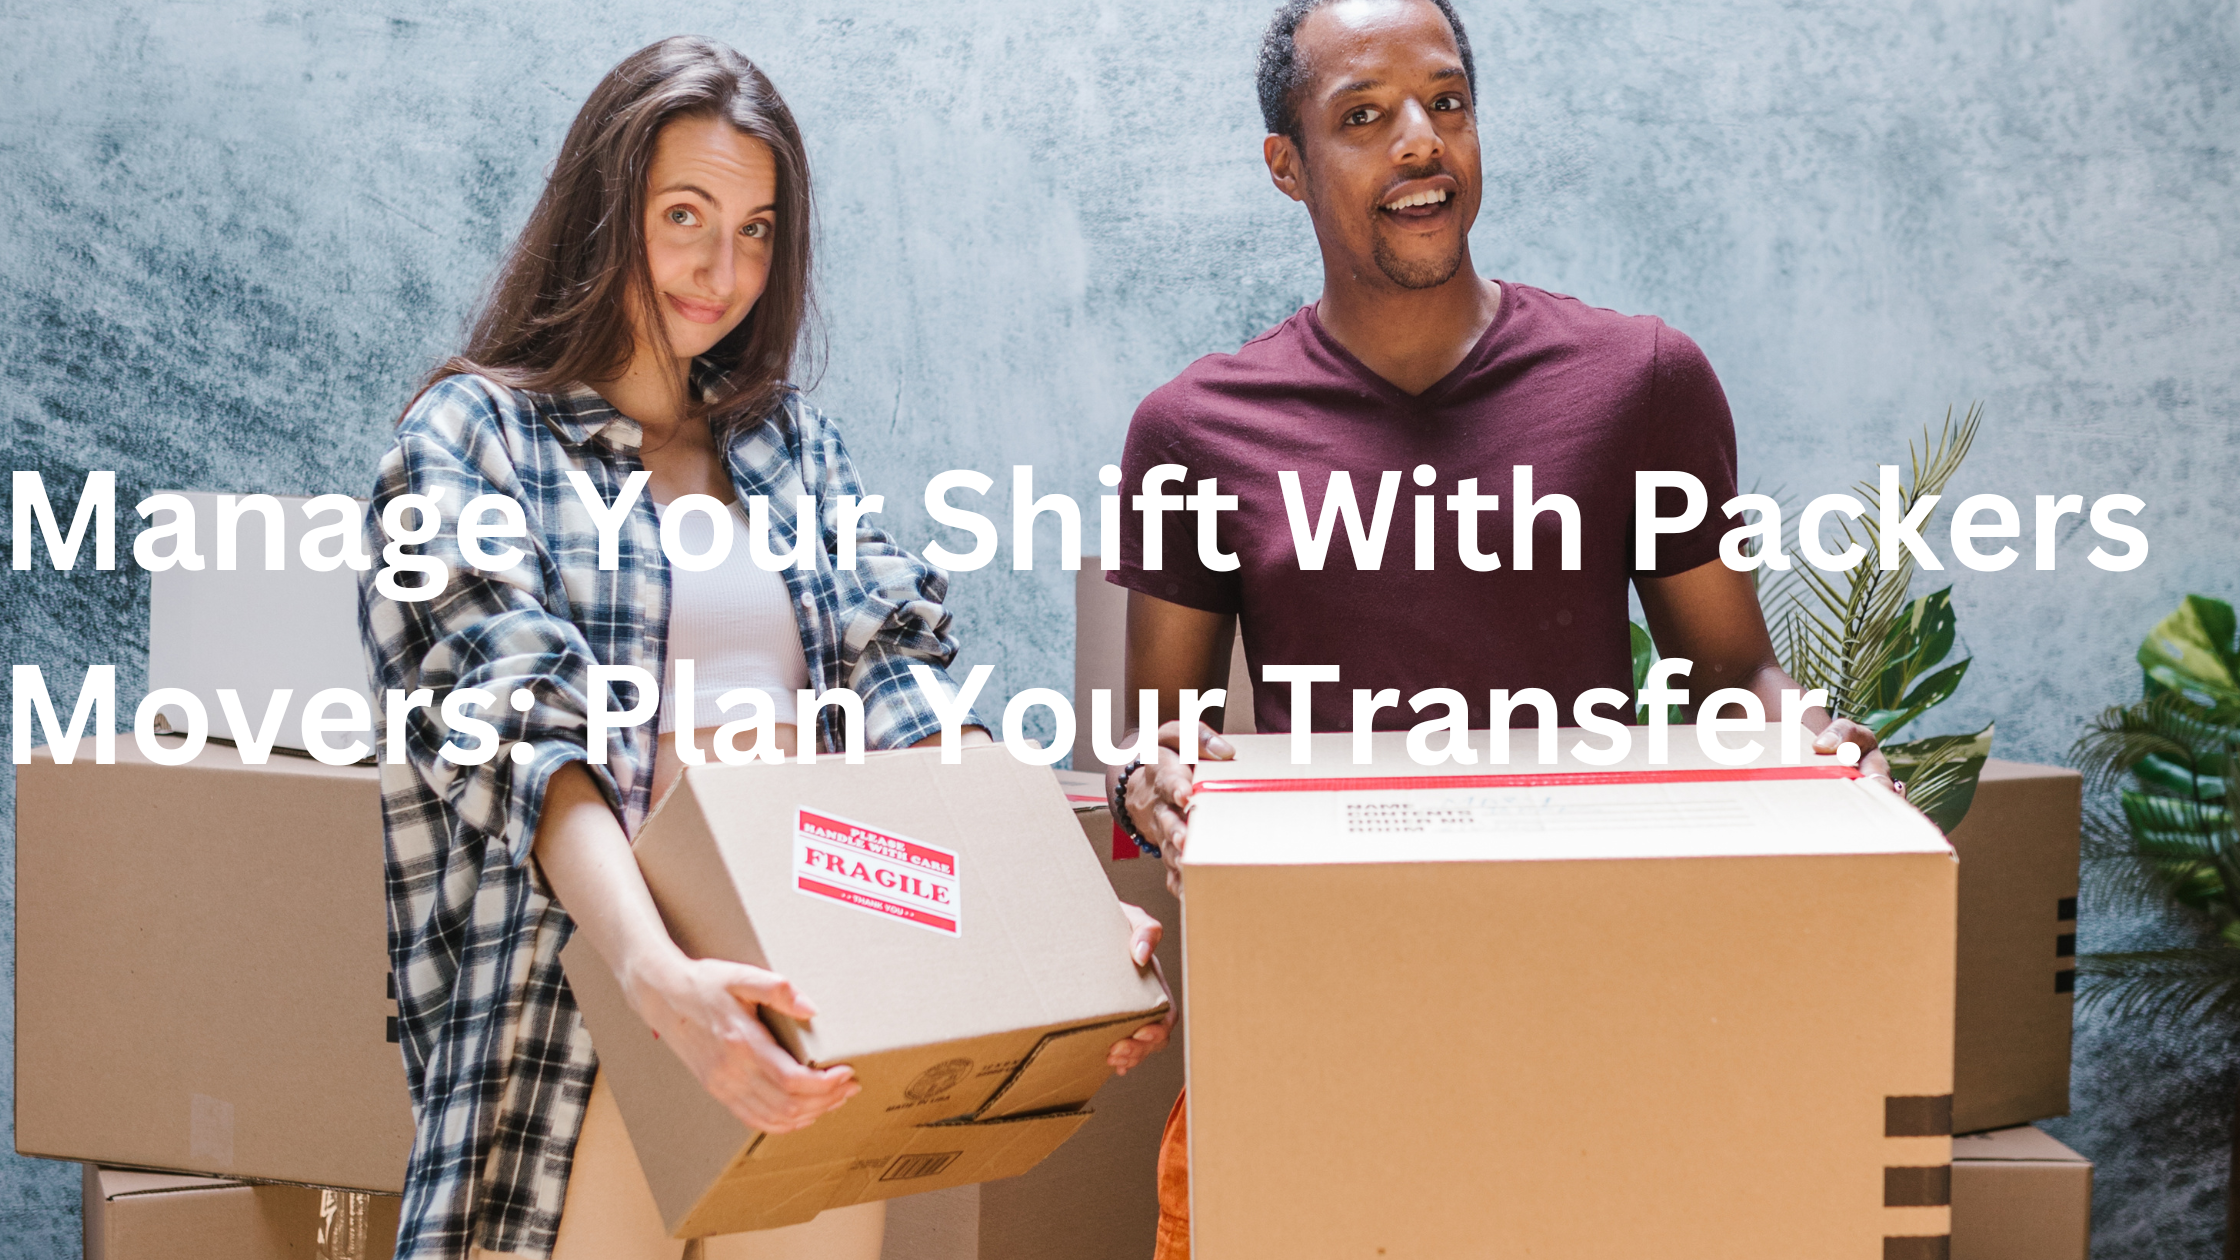 Manage Your Shift With Packers Movers: Plan Your Transfer.